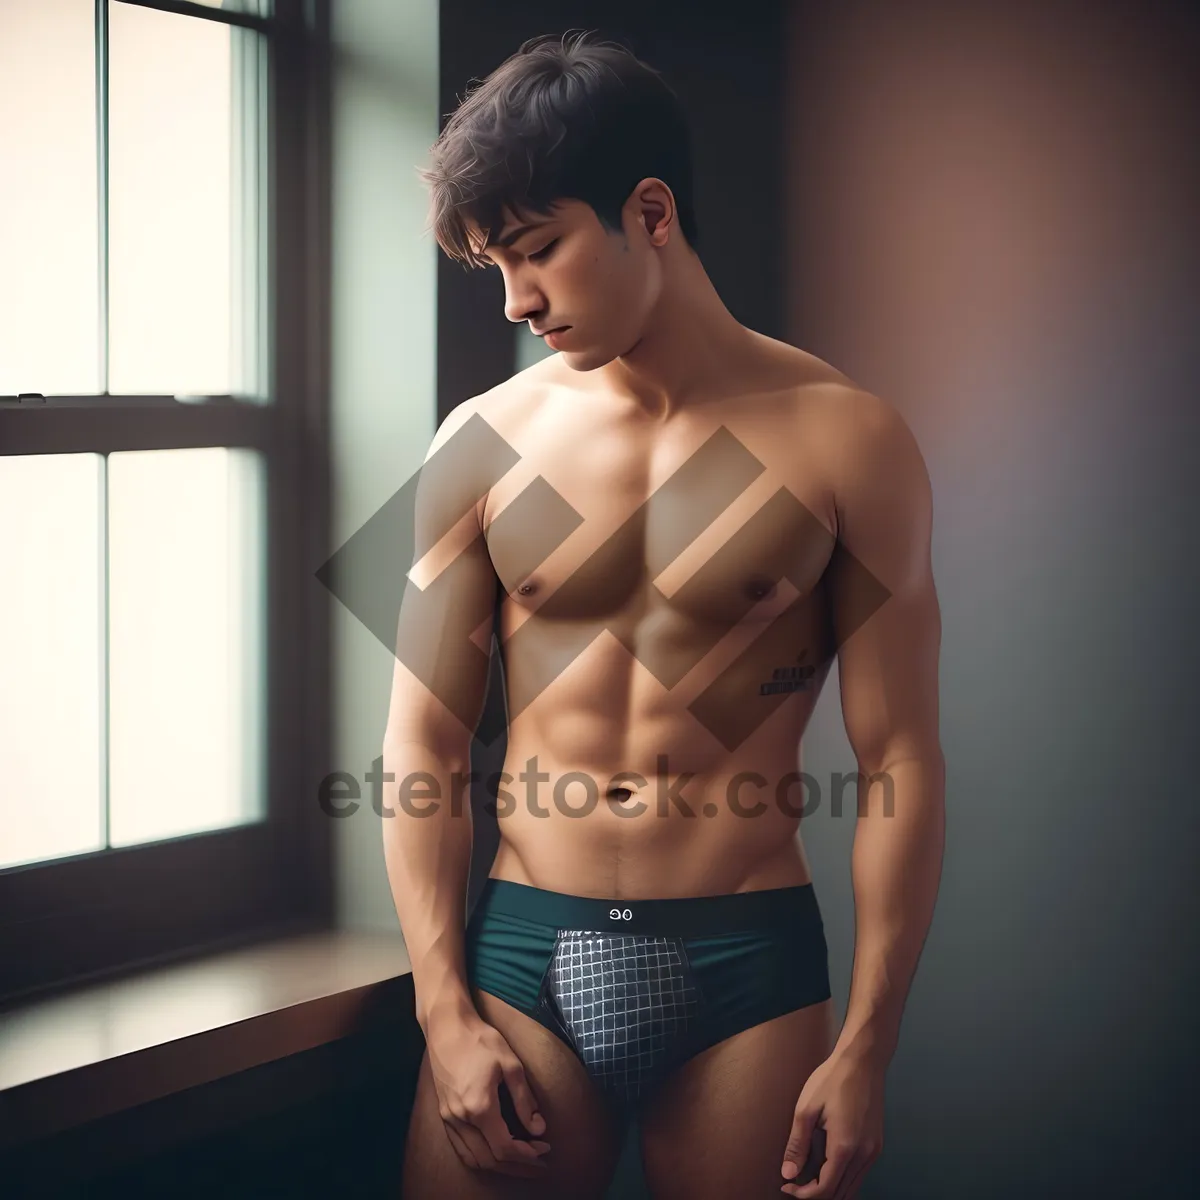 Picture of Muscular Male Fitness Model Posing Shirtless in Studio